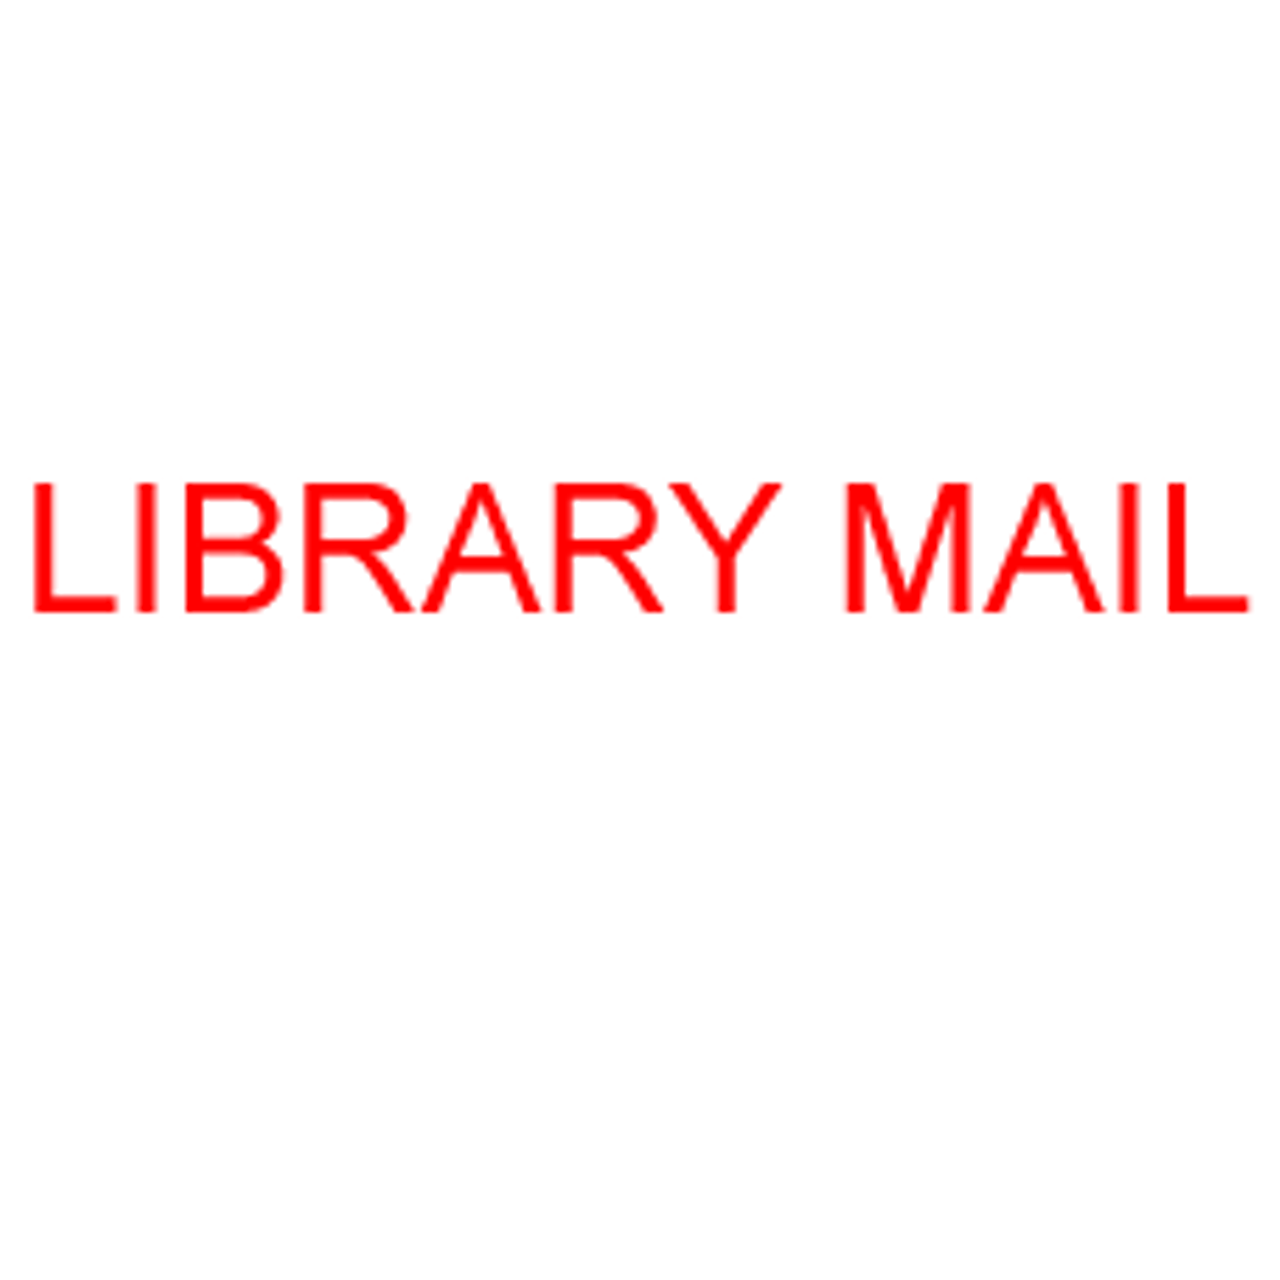 LIBRARY MAIL Rubber Stamp for mail use self-inking